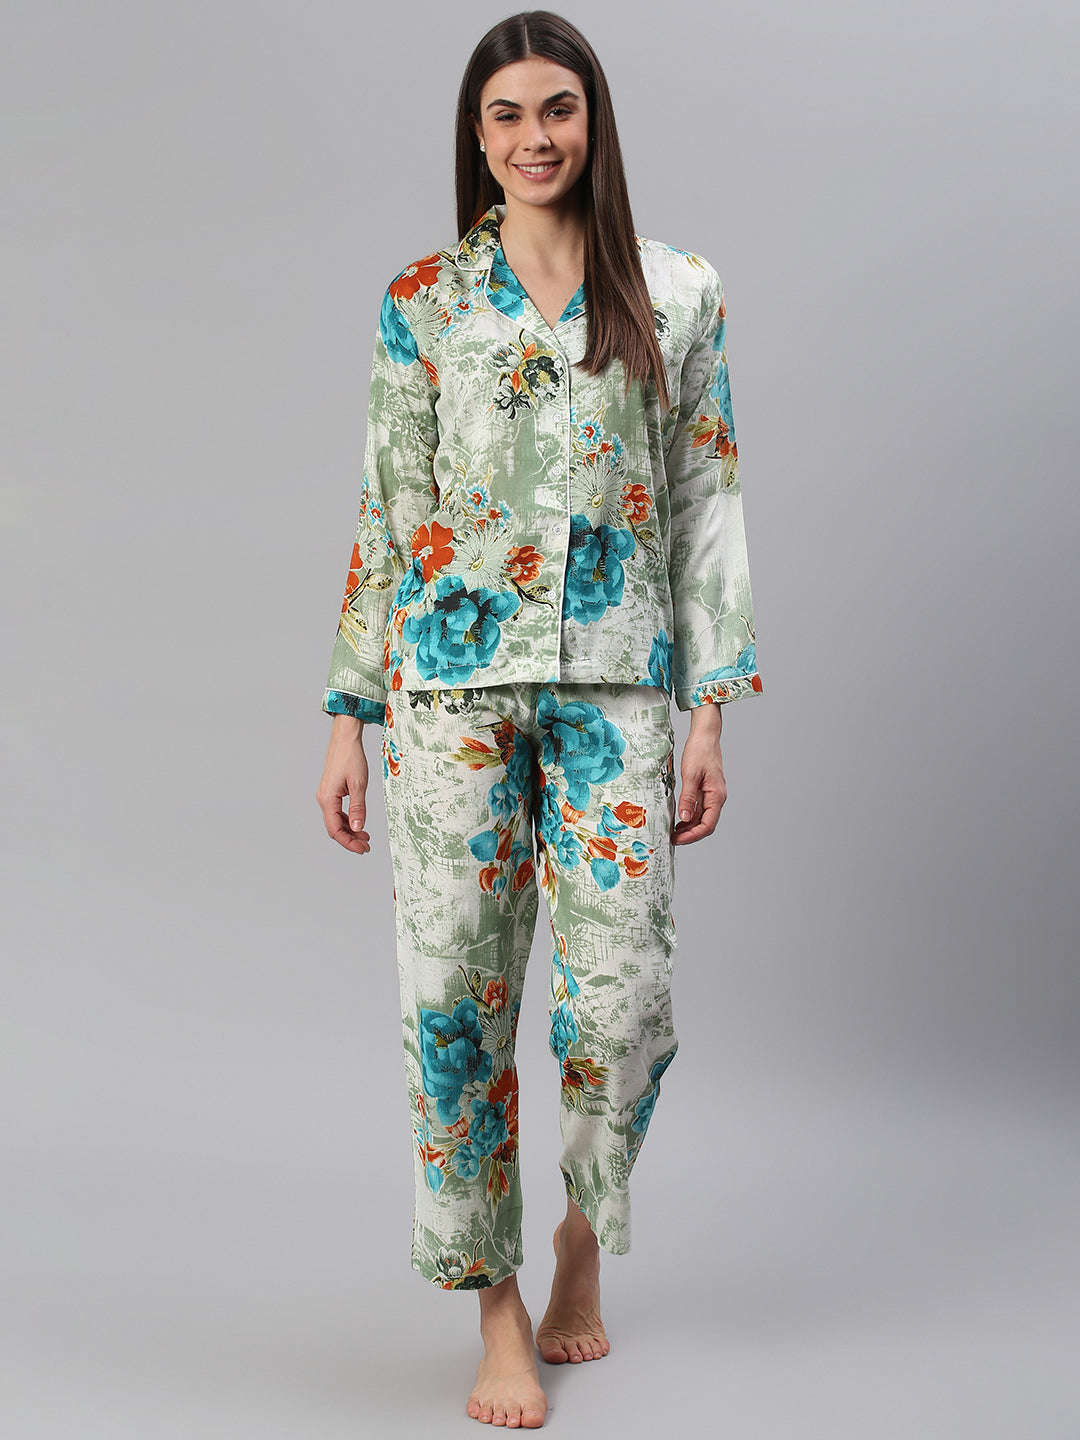 Cation Grey Printed Night Suit